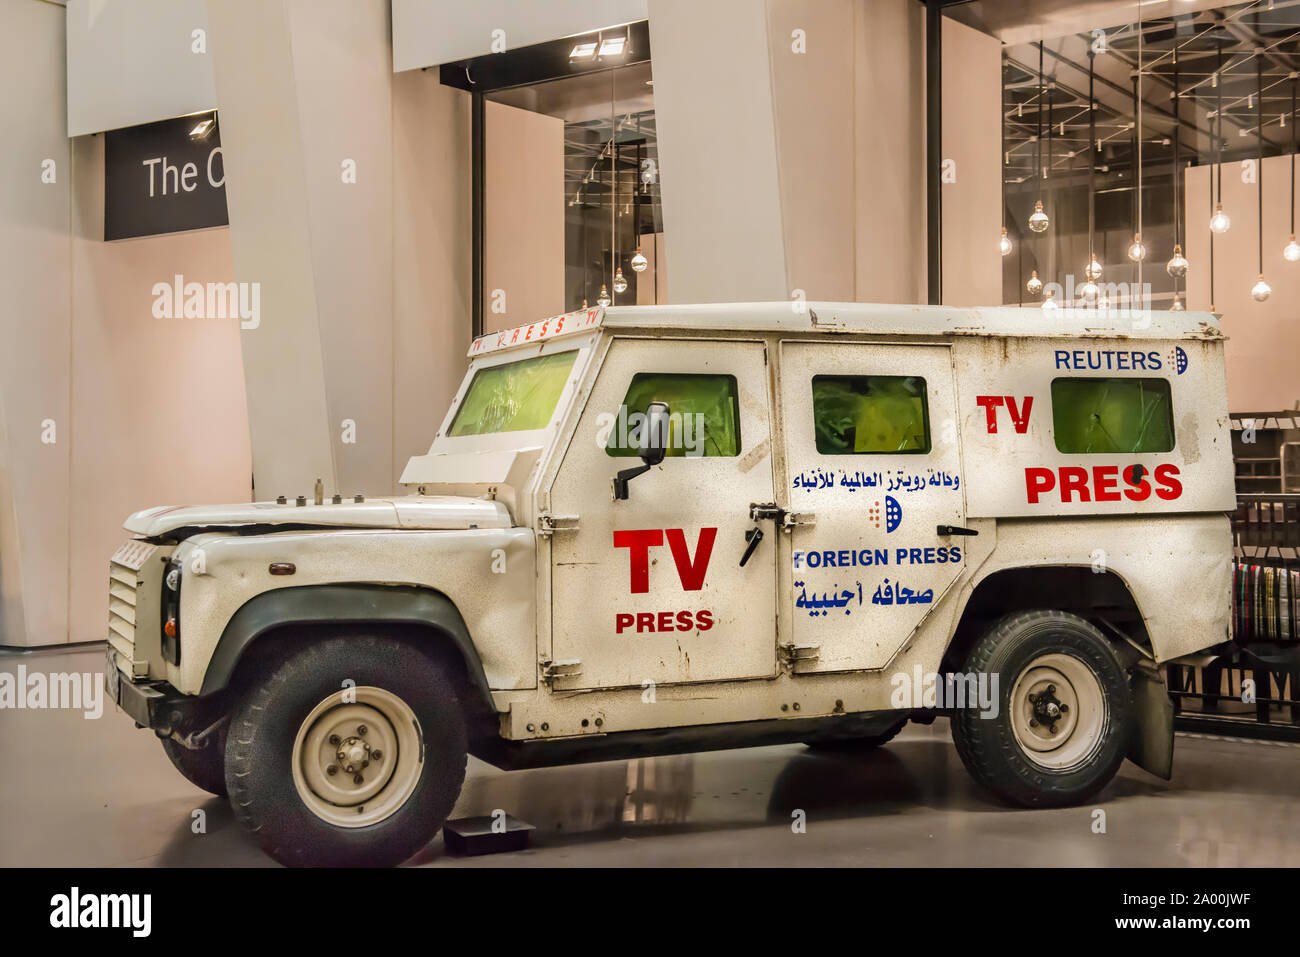 Imperial War Museum exhibit, TV, Press armored vehicle used by reporters covering war zones. Copy Space. War damage visible. Arabic and English ID. Stock Photo